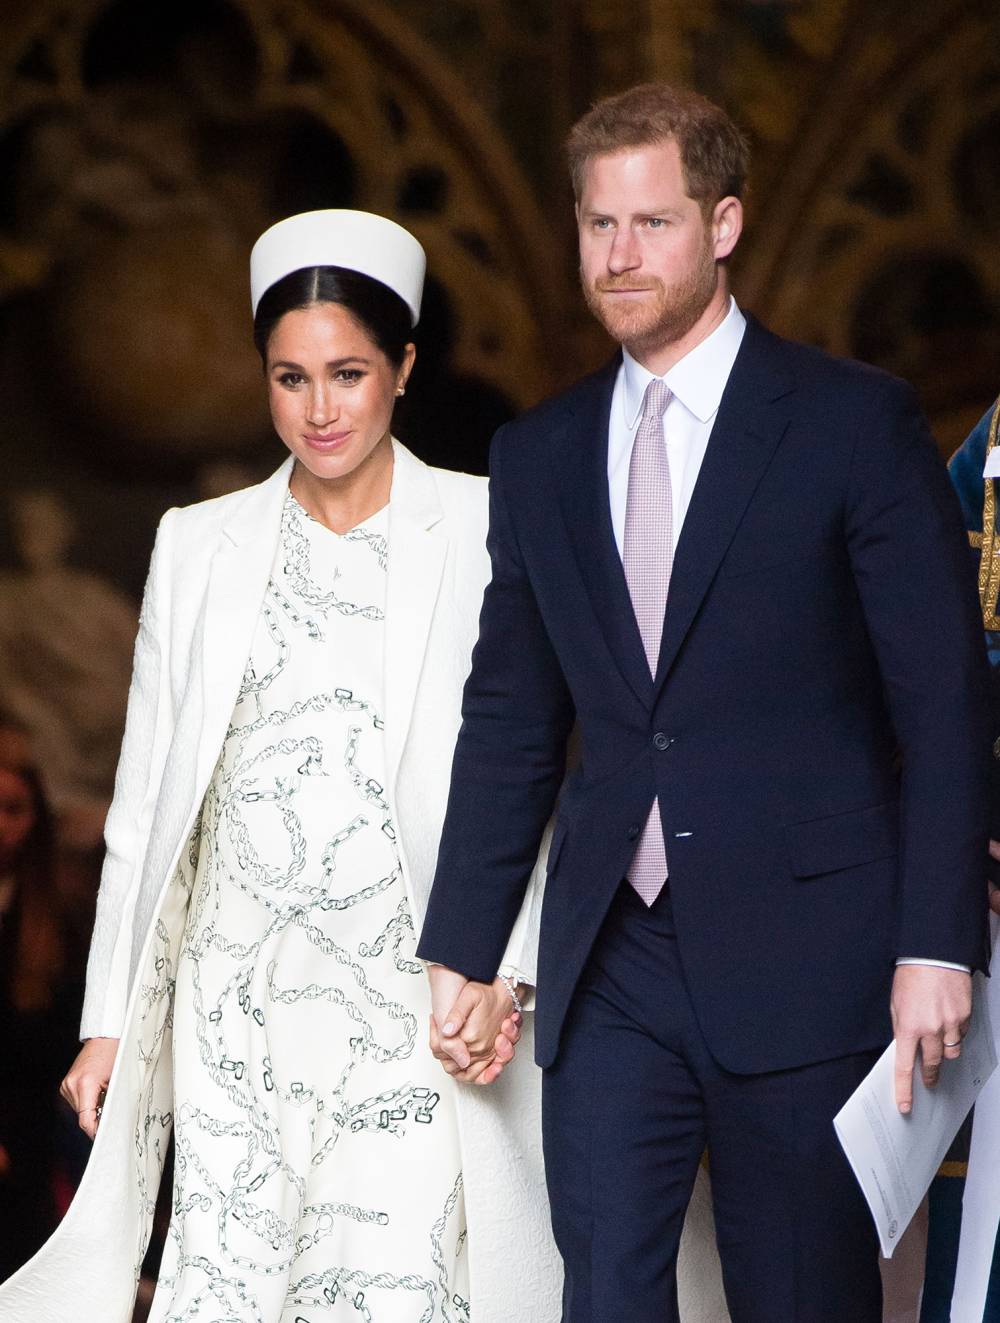 Duchess Meghan ‘Was Made Aware’ That the Royal Family Don’t Have ‘Flashy’ Baby Showers After Her New York City Party